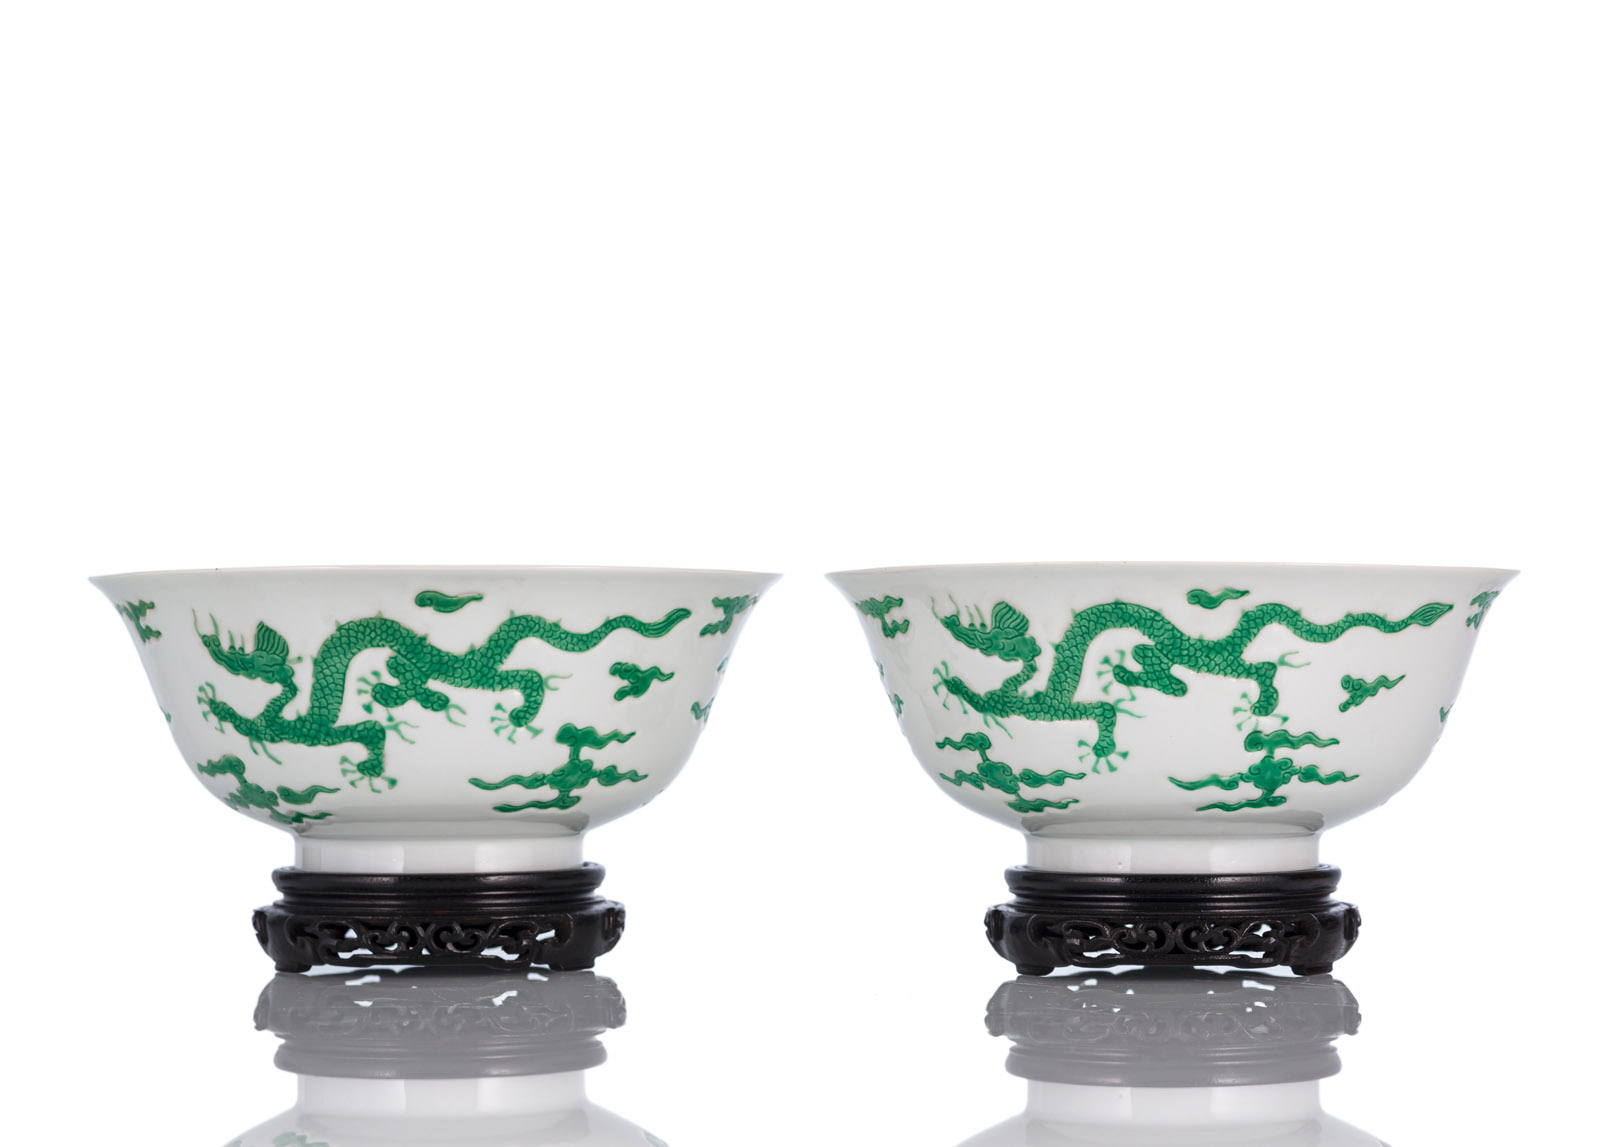 <b>A PAIR OF GREEN-DRAGON BOWLS IN MING STYLE</b>